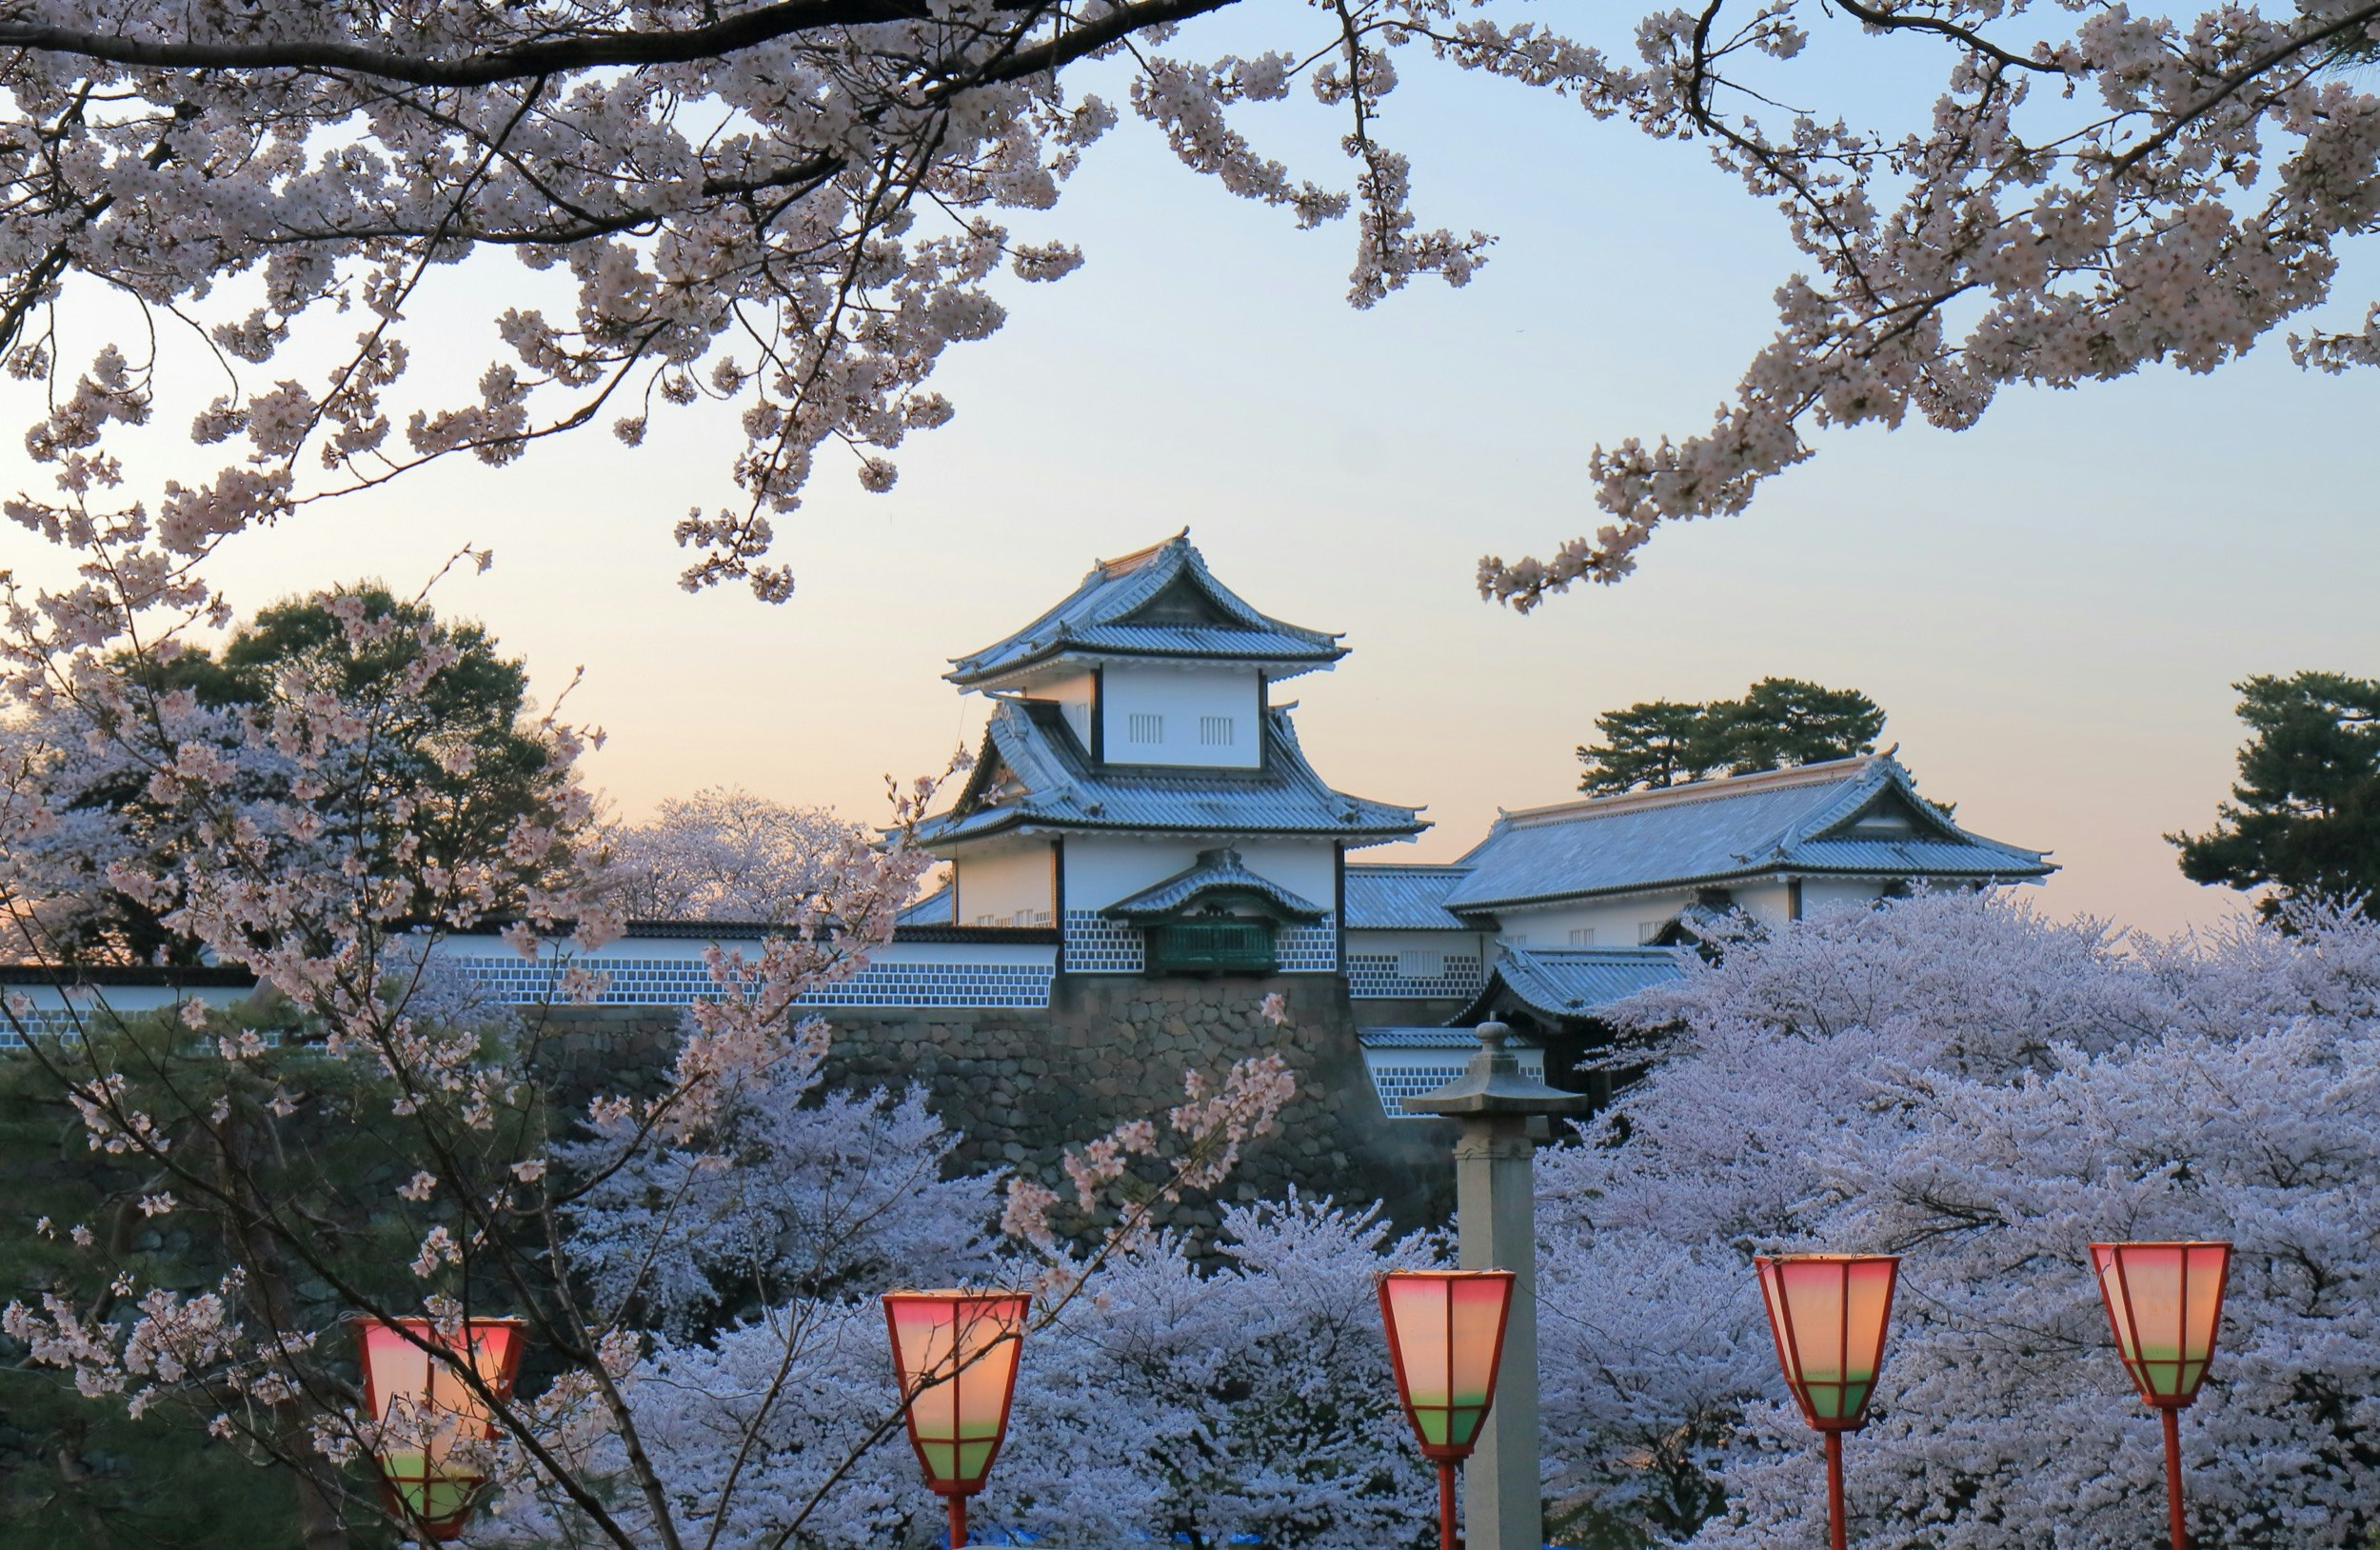 Cherry blossom and Kanazawa castle in Kanazawa Japan; Shutterstock ID 619821536; Your name (First / Last): Ben Buckner; GL account no.: 65050; Netsuite department name: Online Editorial; Full Product or Project name including edition: Japan Three Star Road